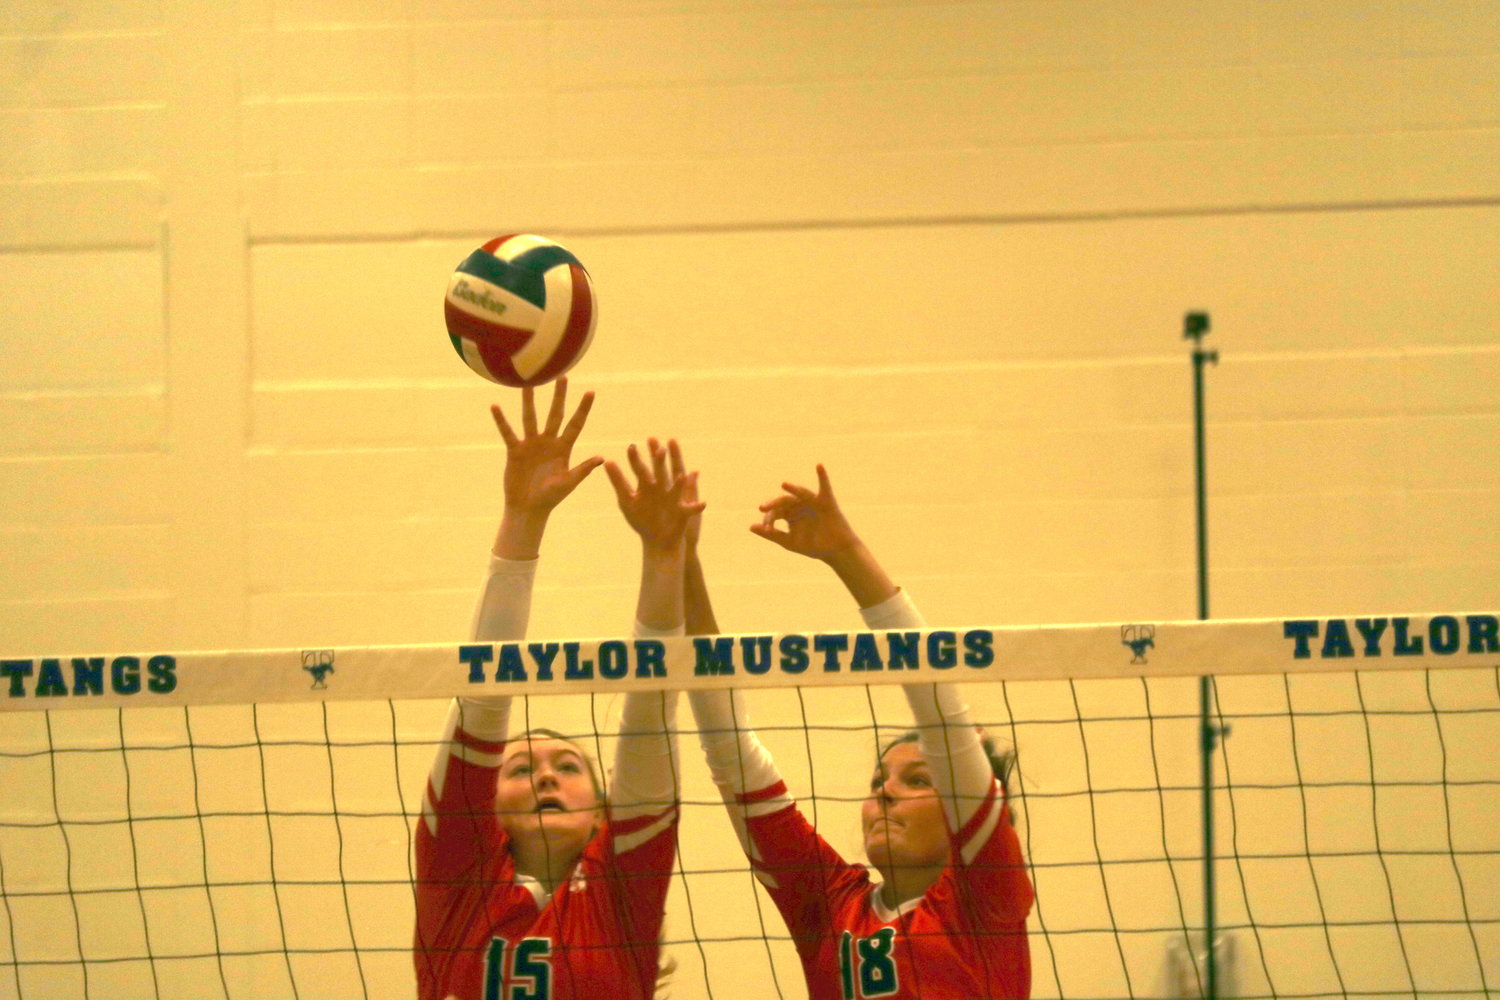 Jordan Gamble and Addison Chapman try to block a ball during during a District 19-6A match between Katy and Taylor at the Taylor gym.